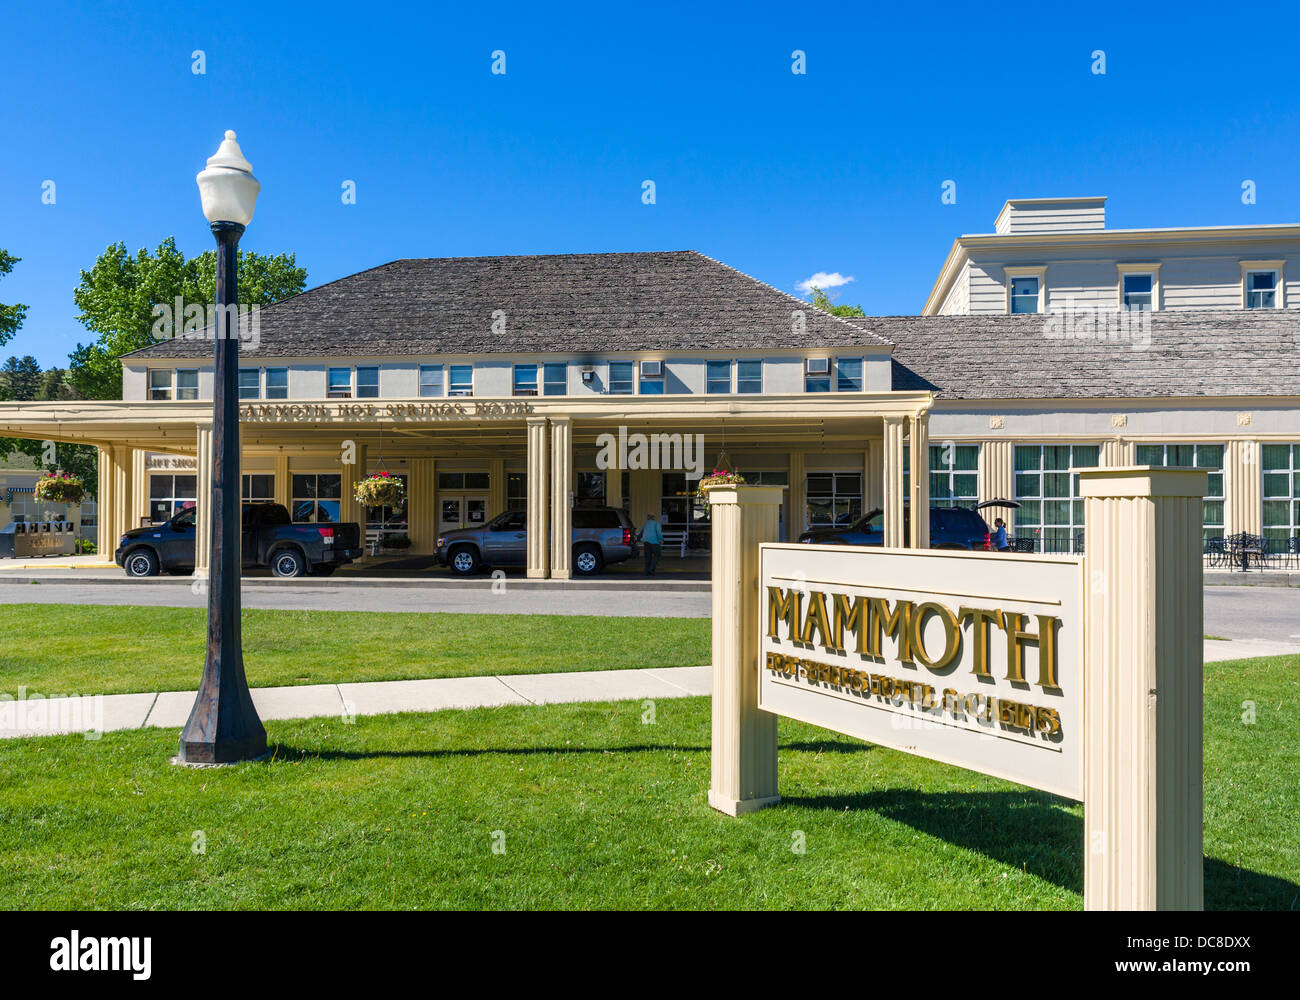 Mammoth Hot Springs Hotel, le Parc National de Yellowstone, Wyoming, USA Banque D'Images